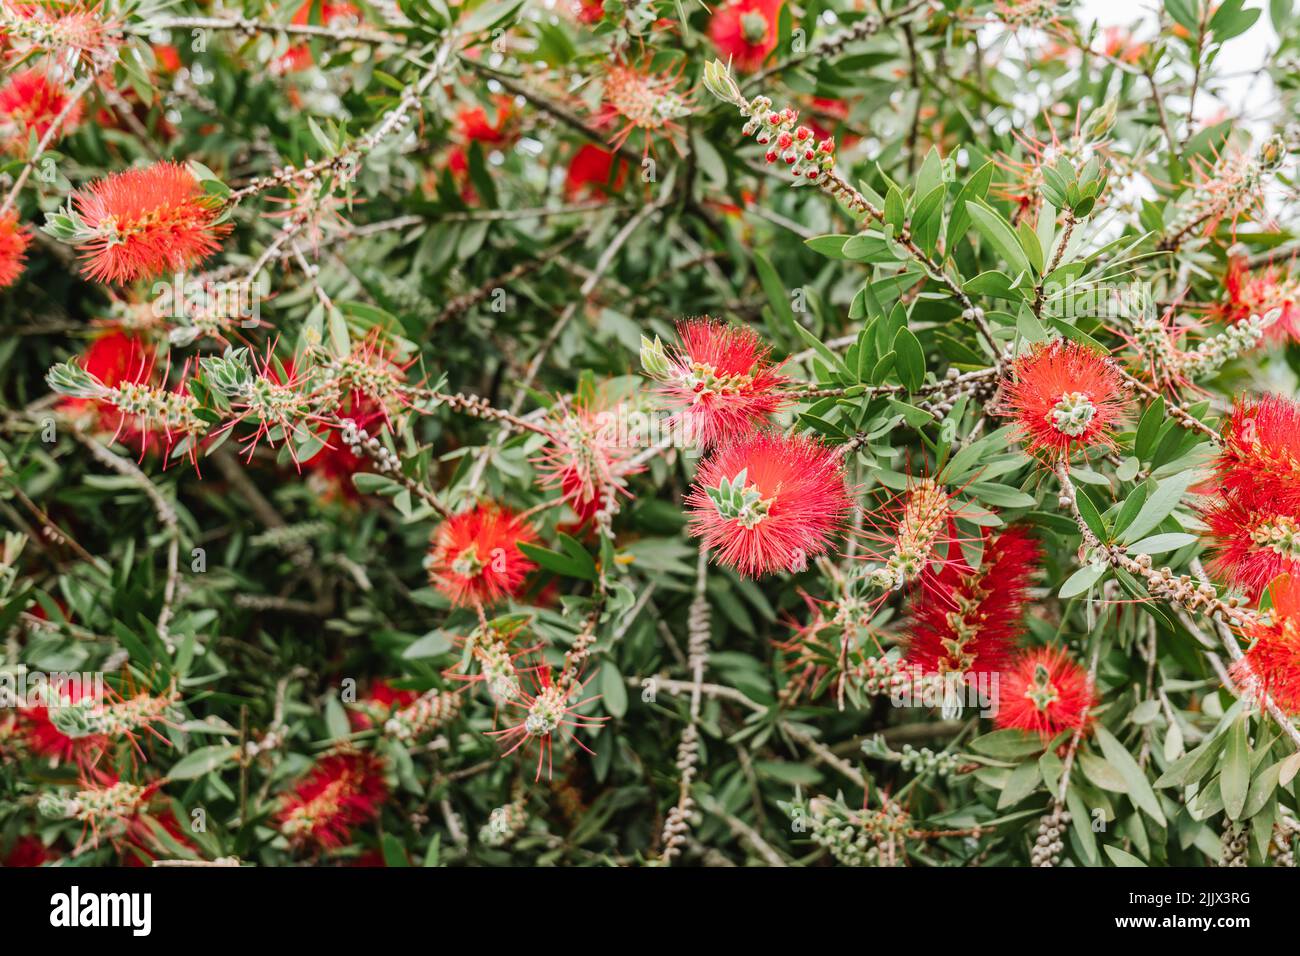 Gentle Albany bottlebrush flower with bright red spikes growing on green shrub on sunny day in garden Stock Photo